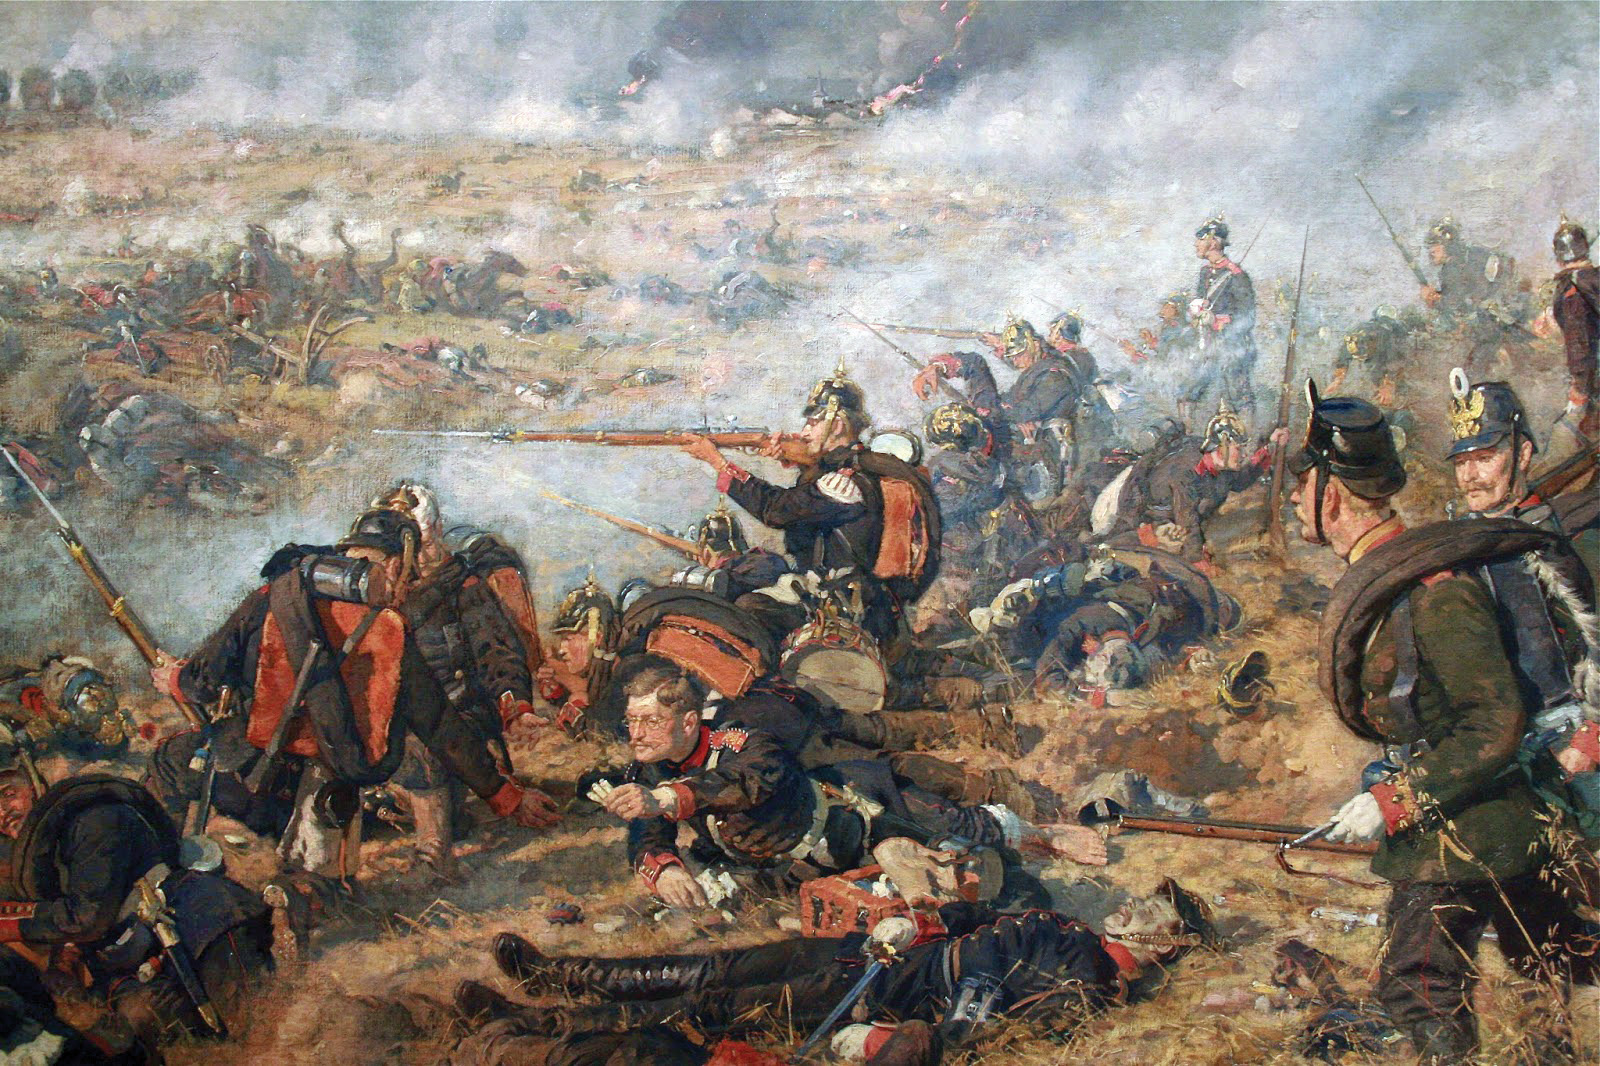 The Prussians suffered heavy casualties on both flanks at Gravelotte-Saint-Privat. The casualties were so high on the Prussian right at Gravelotte where Chief of Staff Helmut von Moltke observed the battle that he initially thought the Prussians had lost the day.